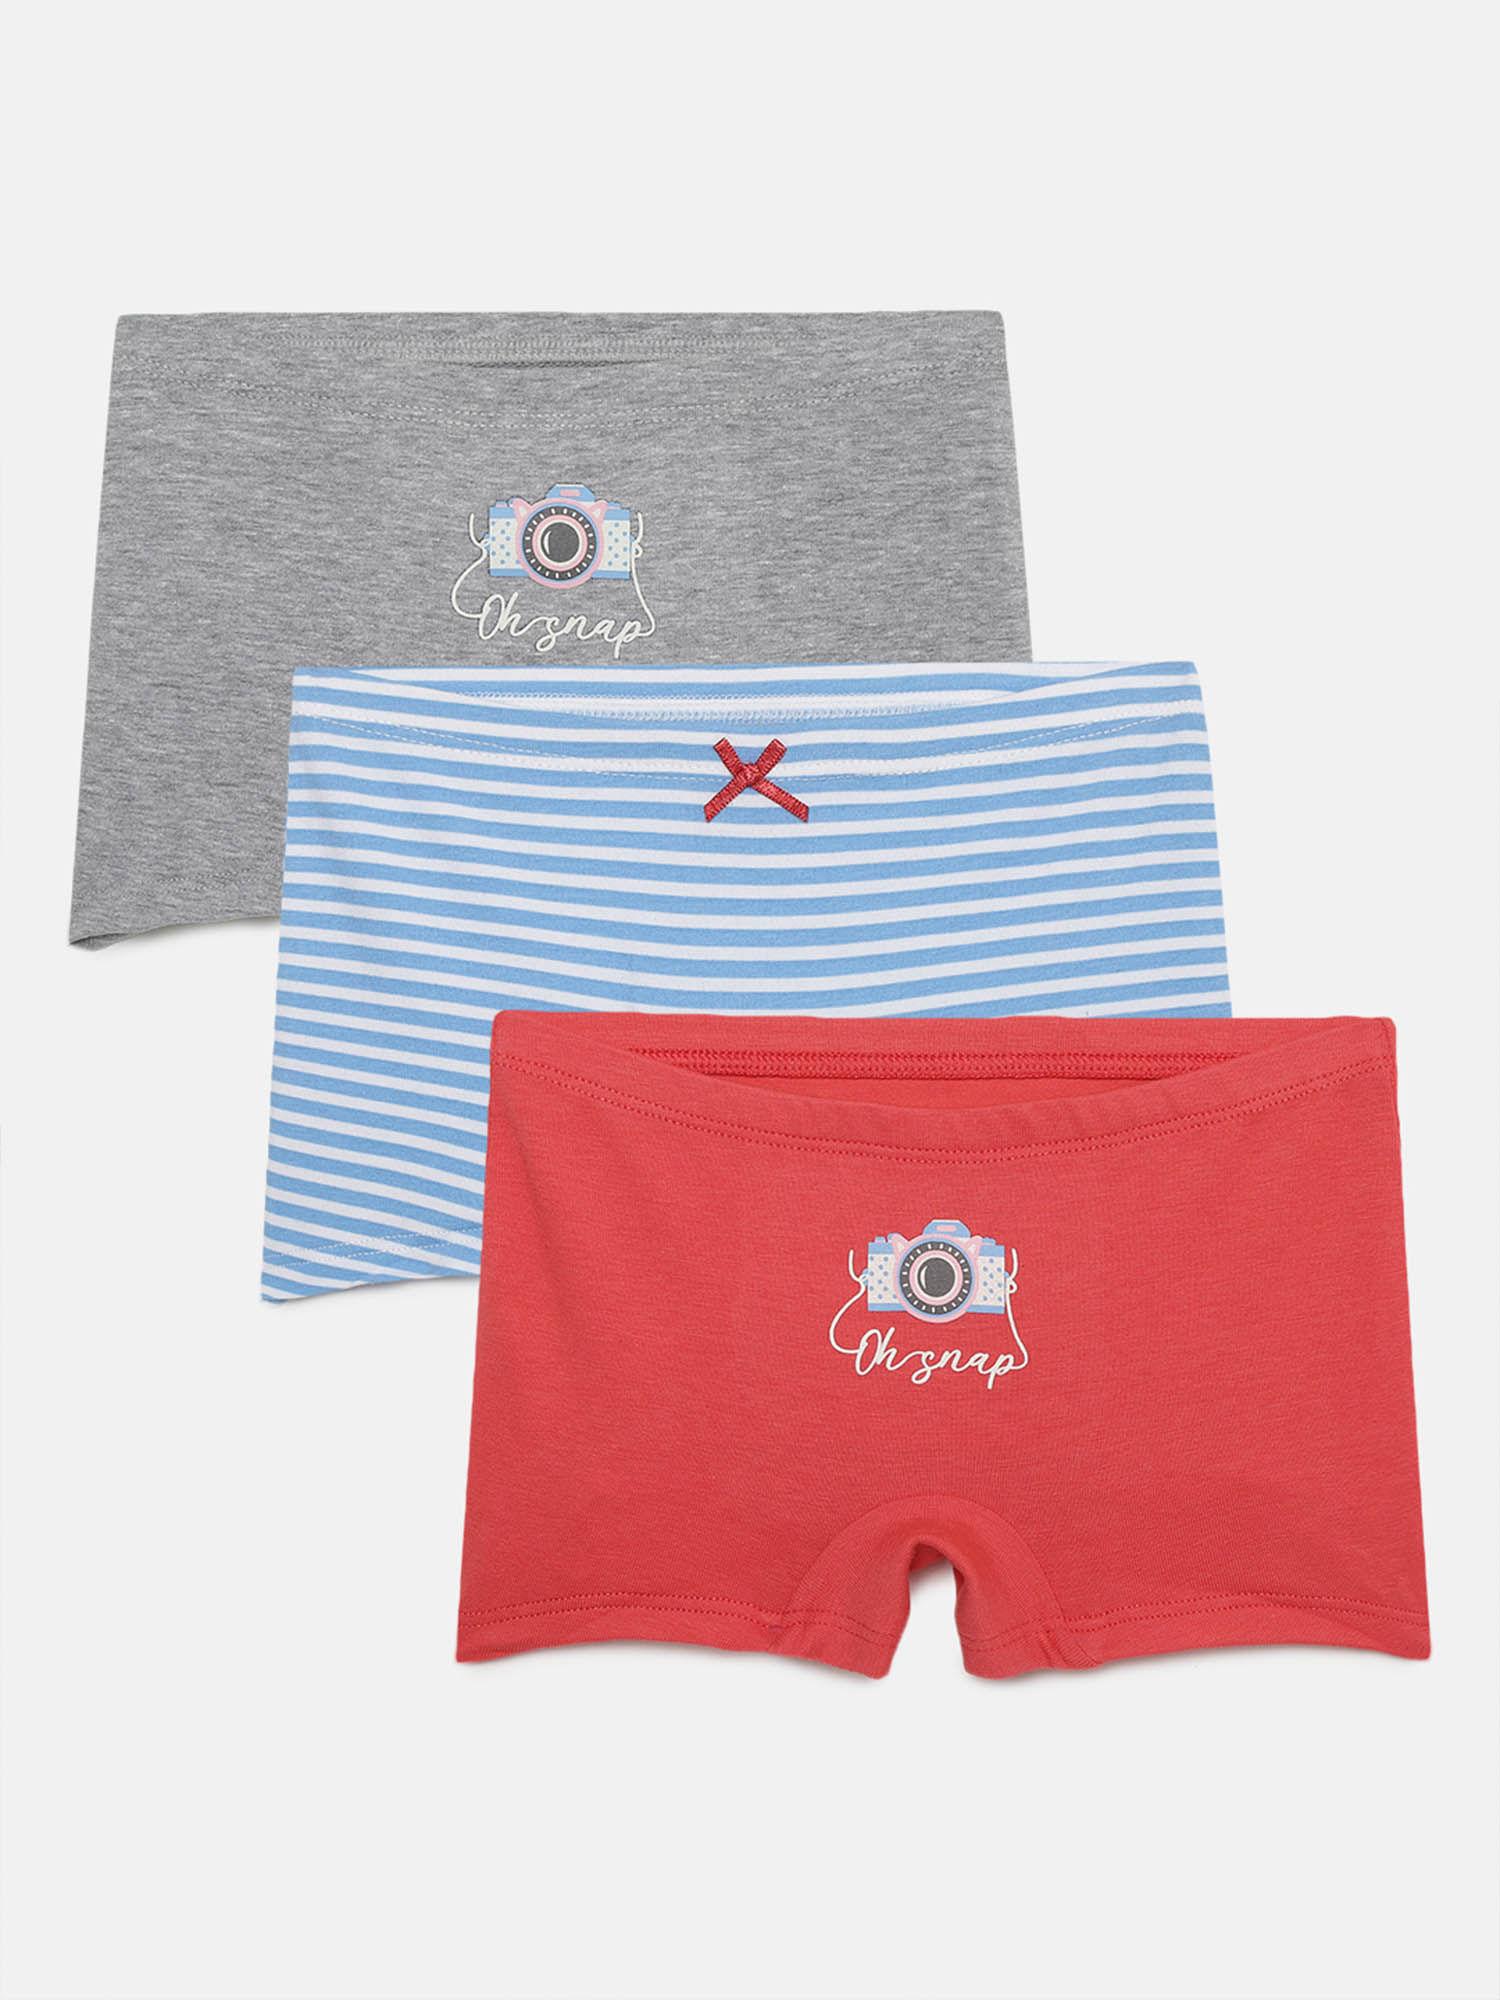 girls-printed-cotton-boxer-grey-melange,-grey-and-red-(pack-of-3)